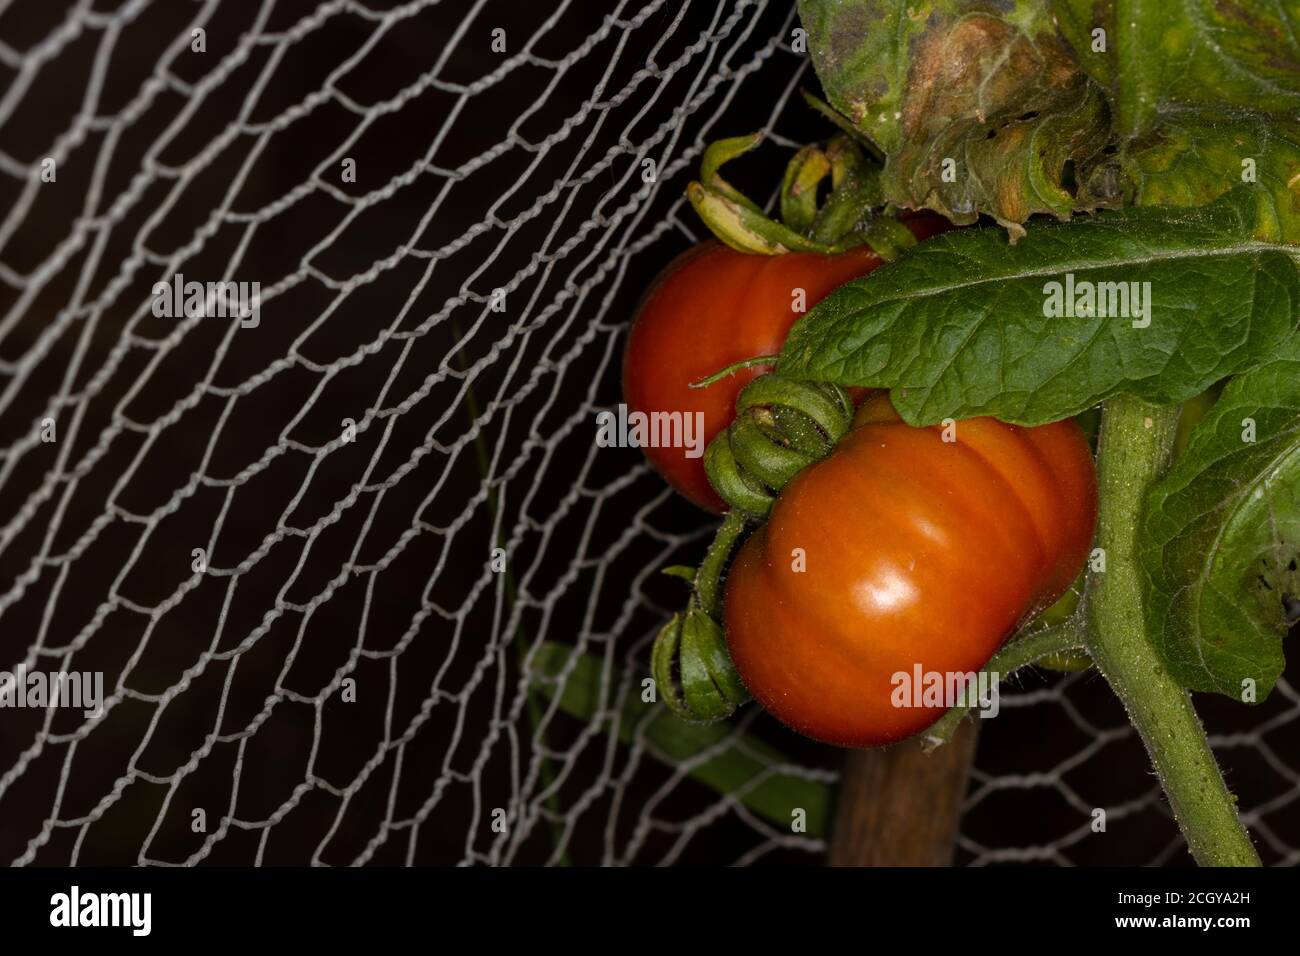 Large red tomatoes on the vine in home garden setting with steel mesh background Stock Photo